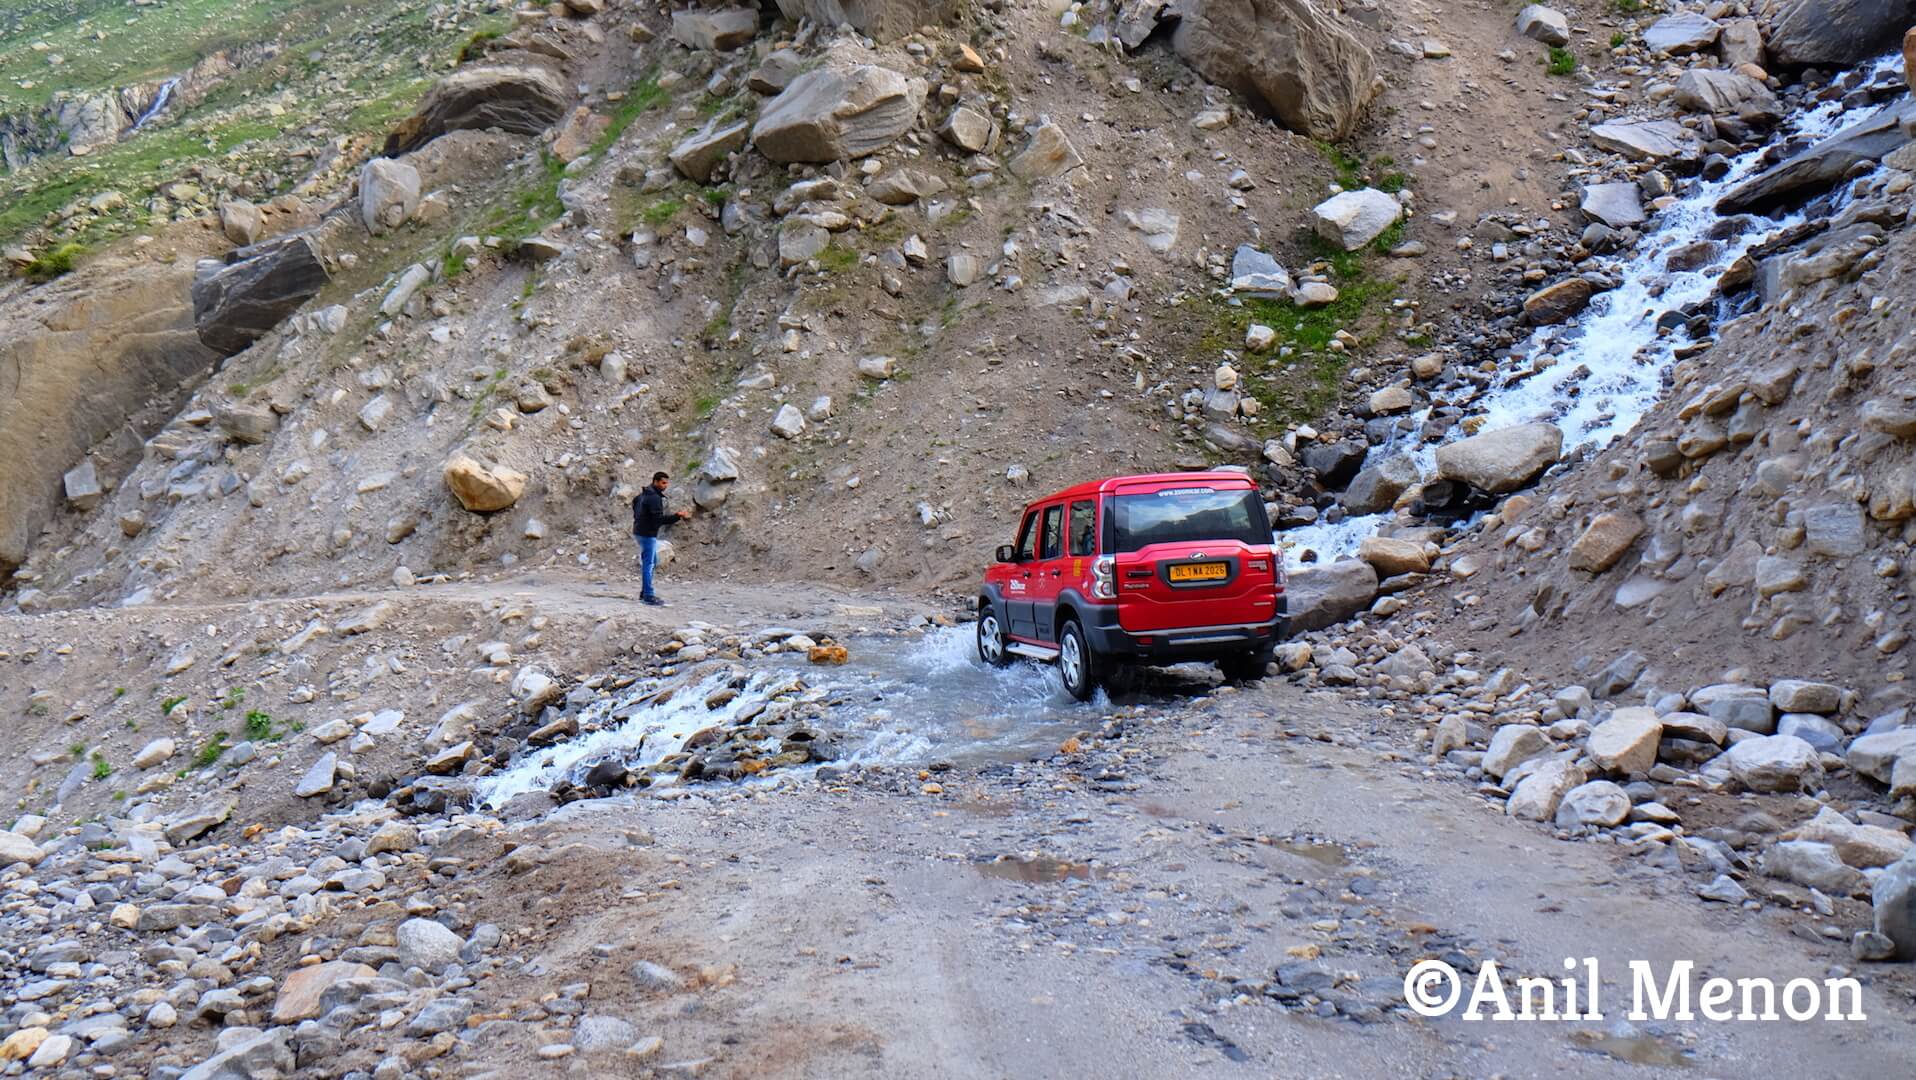 A red car navigating through a stream and bad roads